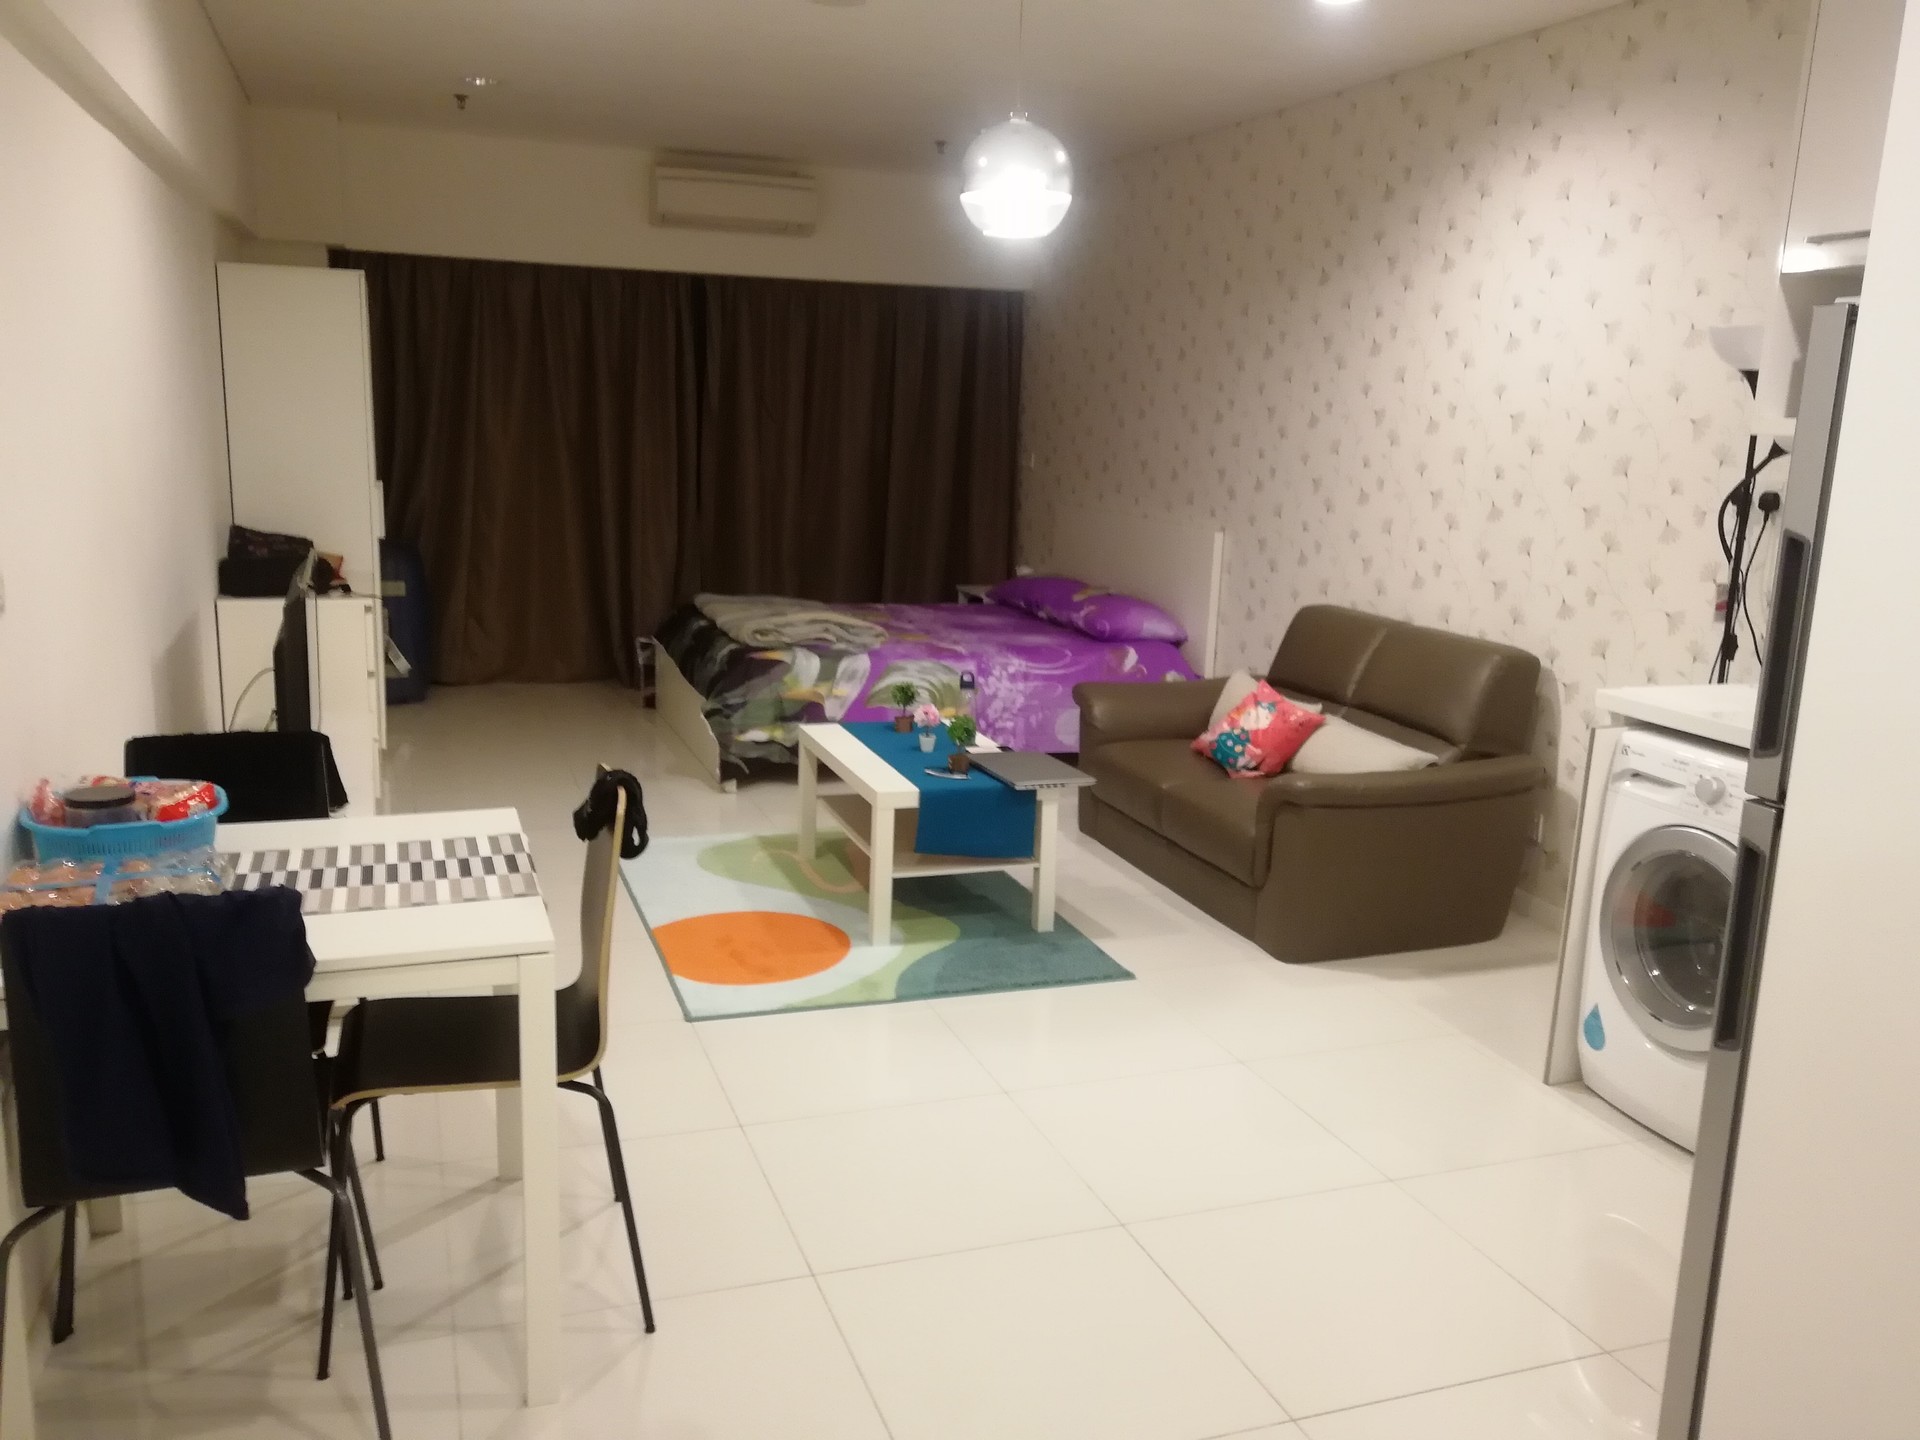 Studio Apartment Fully Furnished Available In Sharing Basis Rent Studios Kuala Lumpur